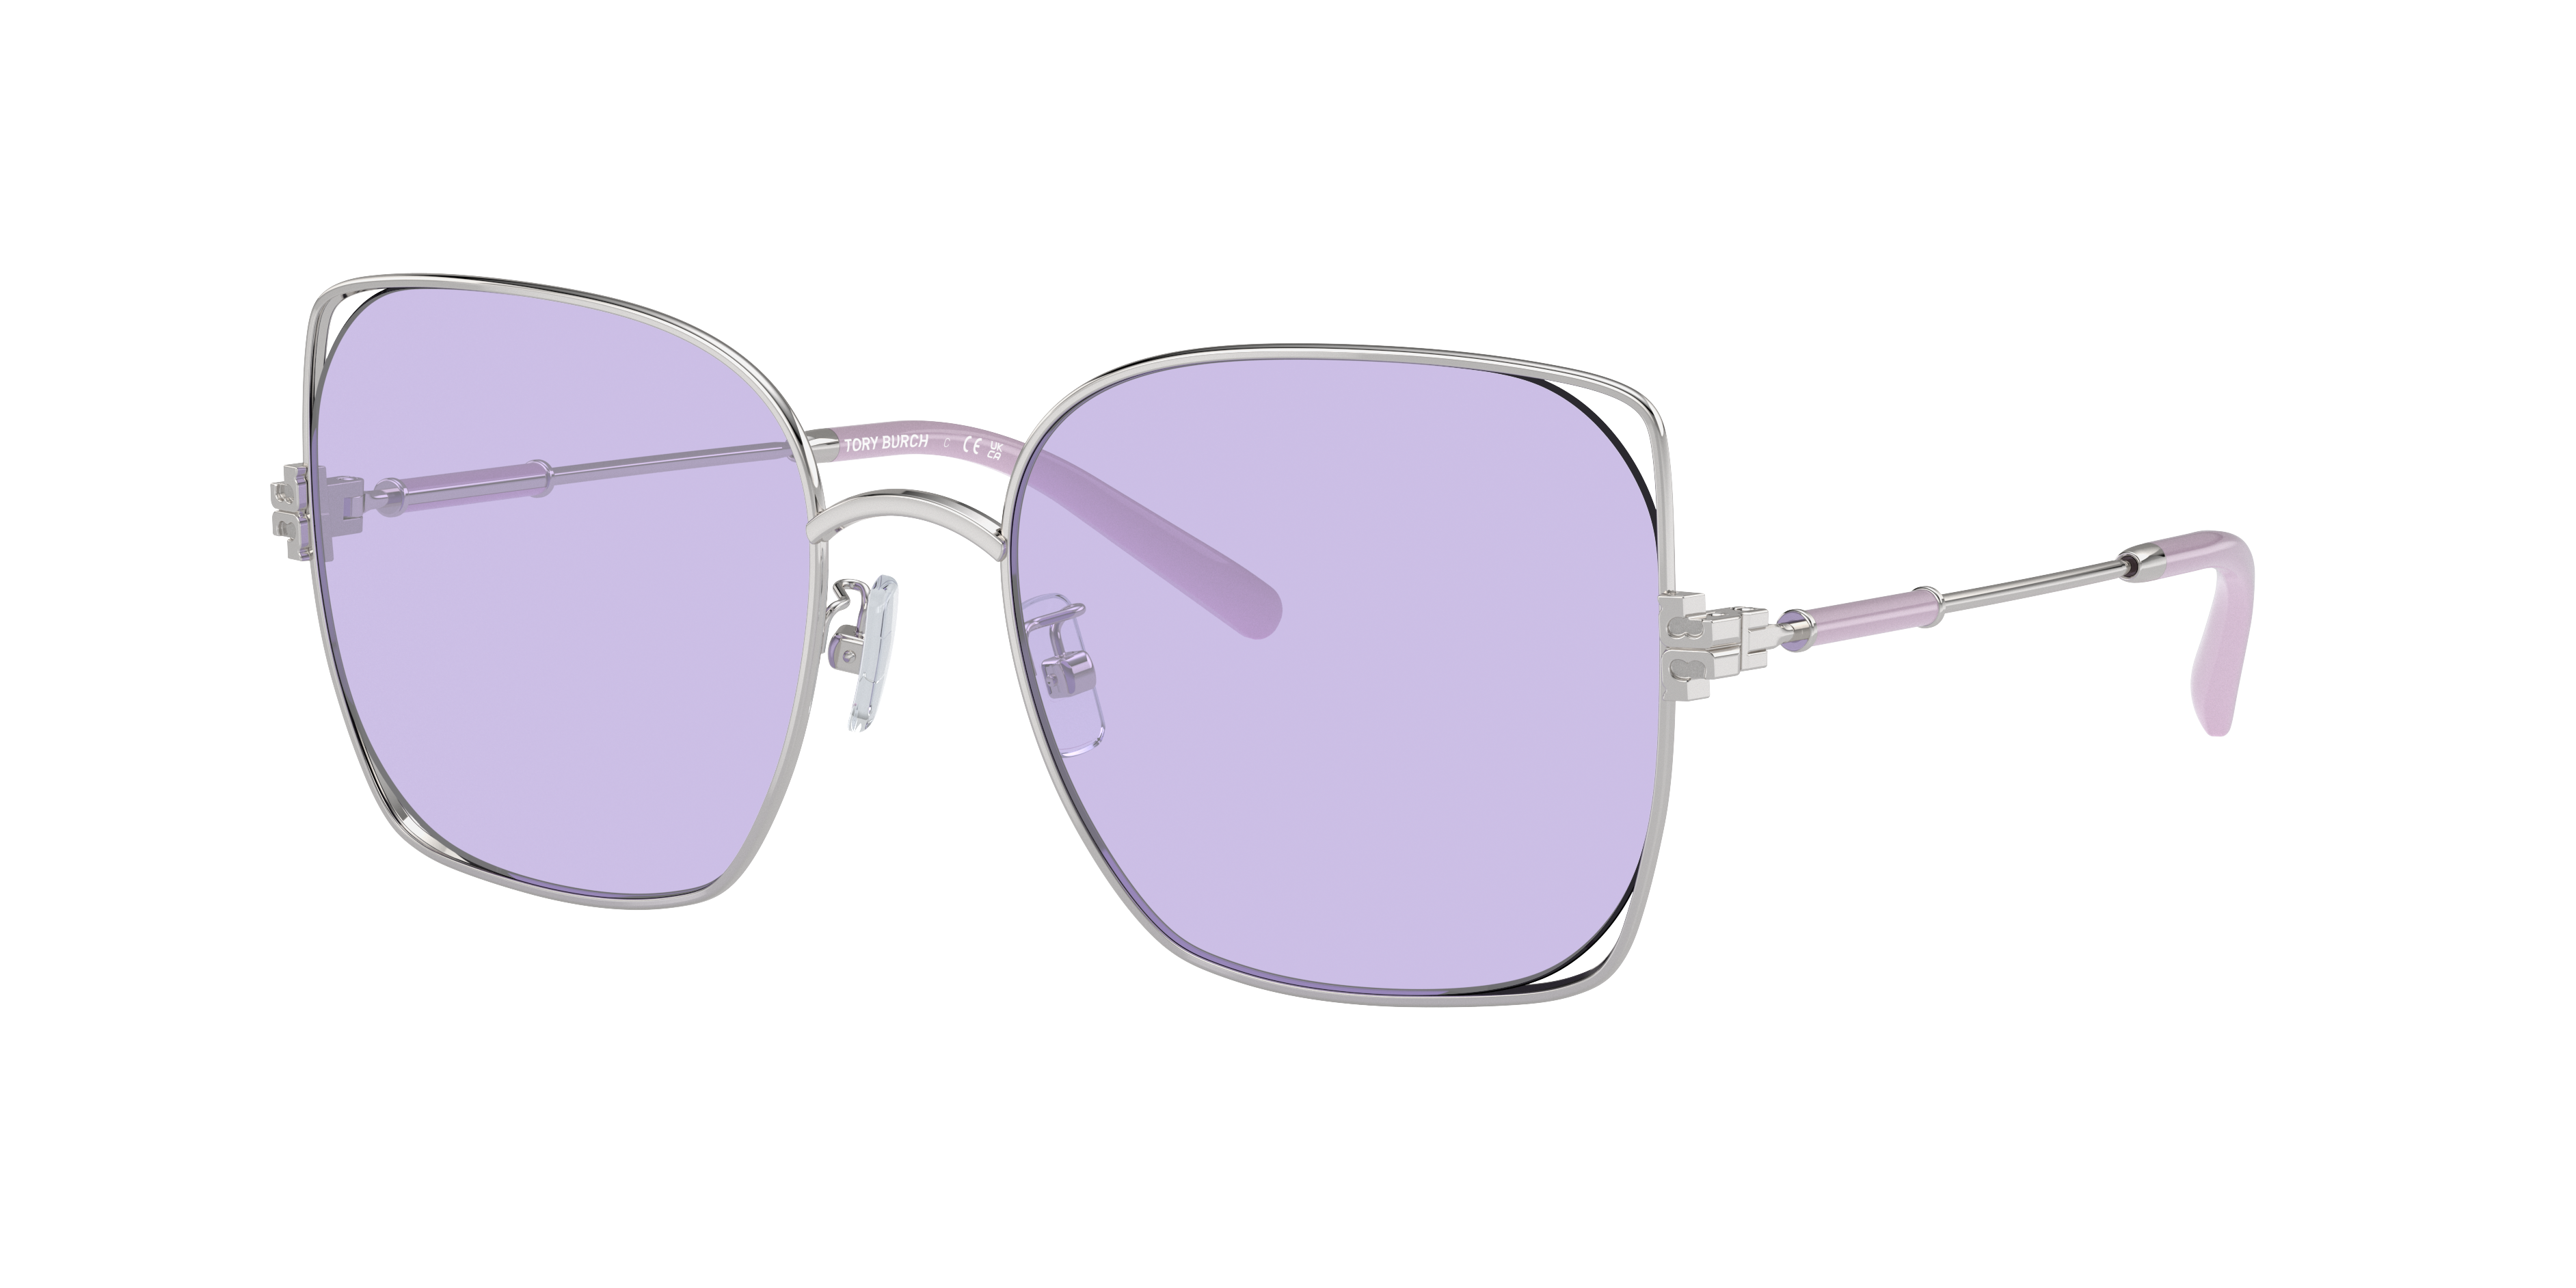 Tory Burch Woman Sunglass Ty6097 In Violet